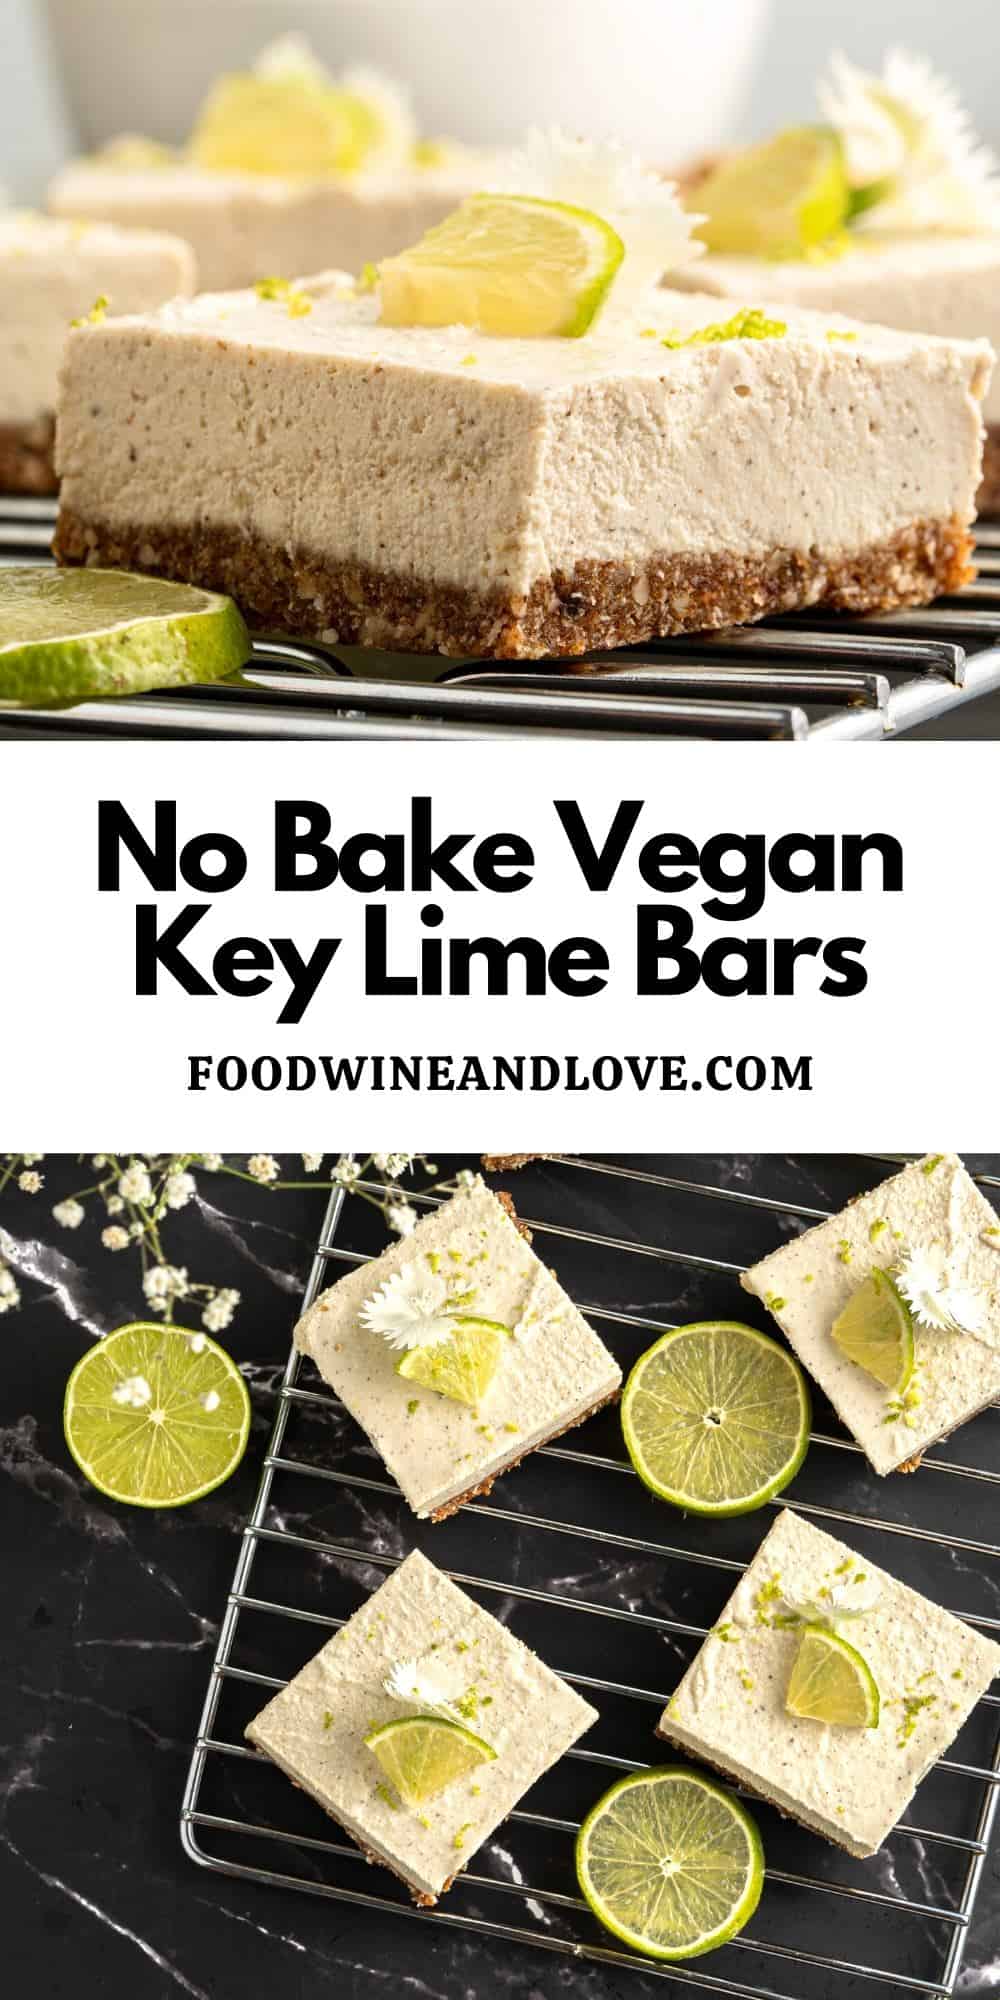 No Bake Vegan Key Lime Bars, a simple dessert recipe that is vegan, vegetarian, gluten free, and low carbohydrate diet friendly.